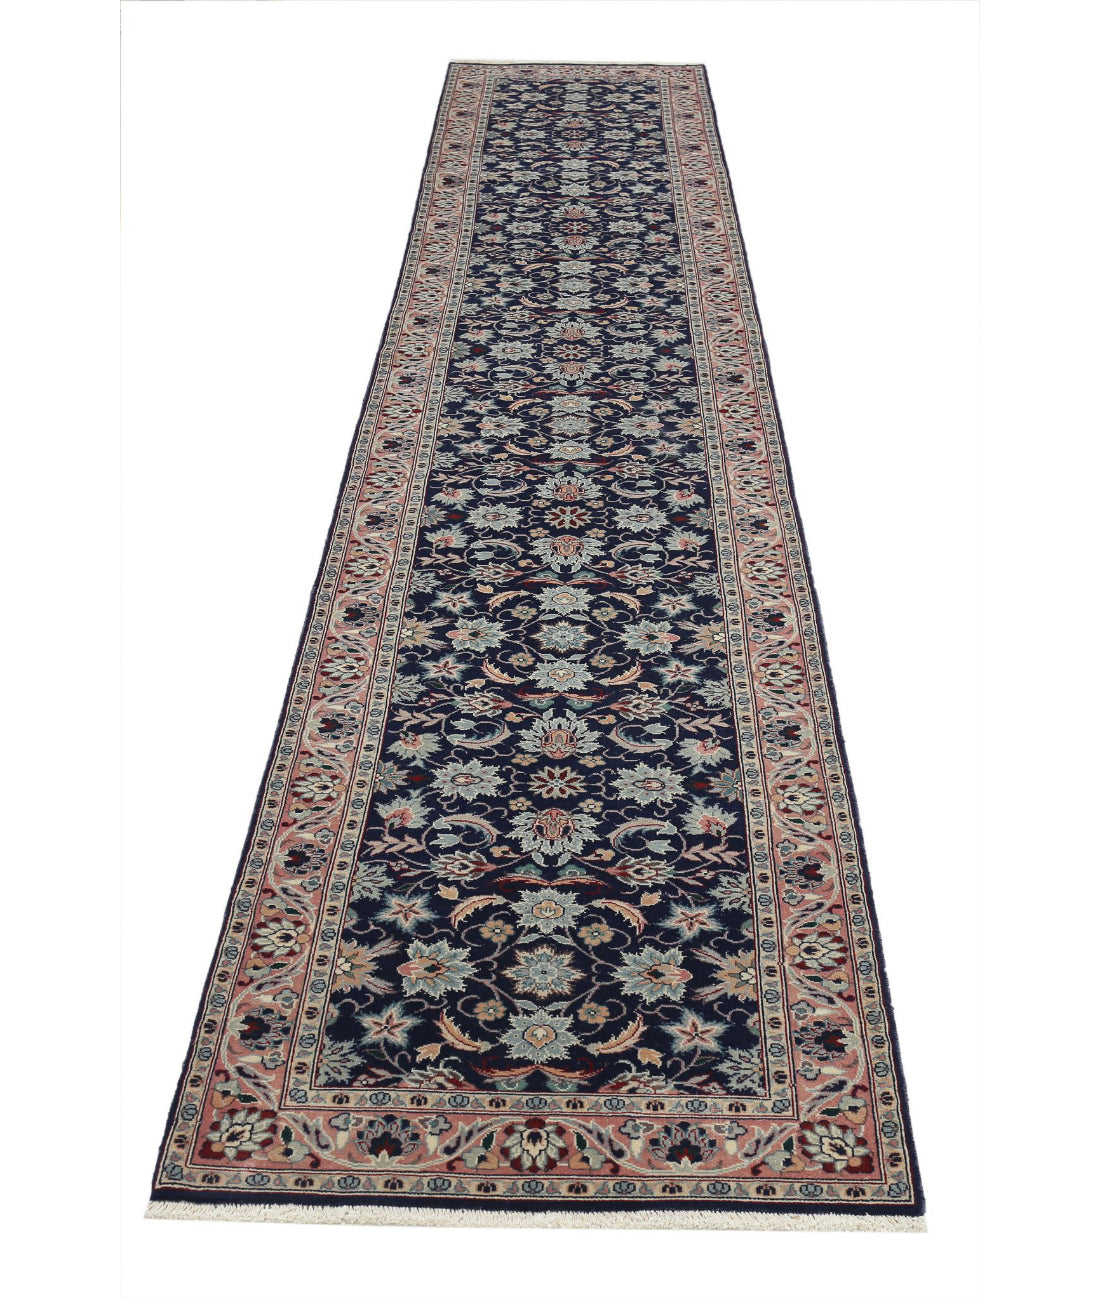 Heritage 2'6'' X 13'8'' Hand-Knotted Wool Rug 2'6'' x 13'8'' (75 X 410) / Blue / Pink